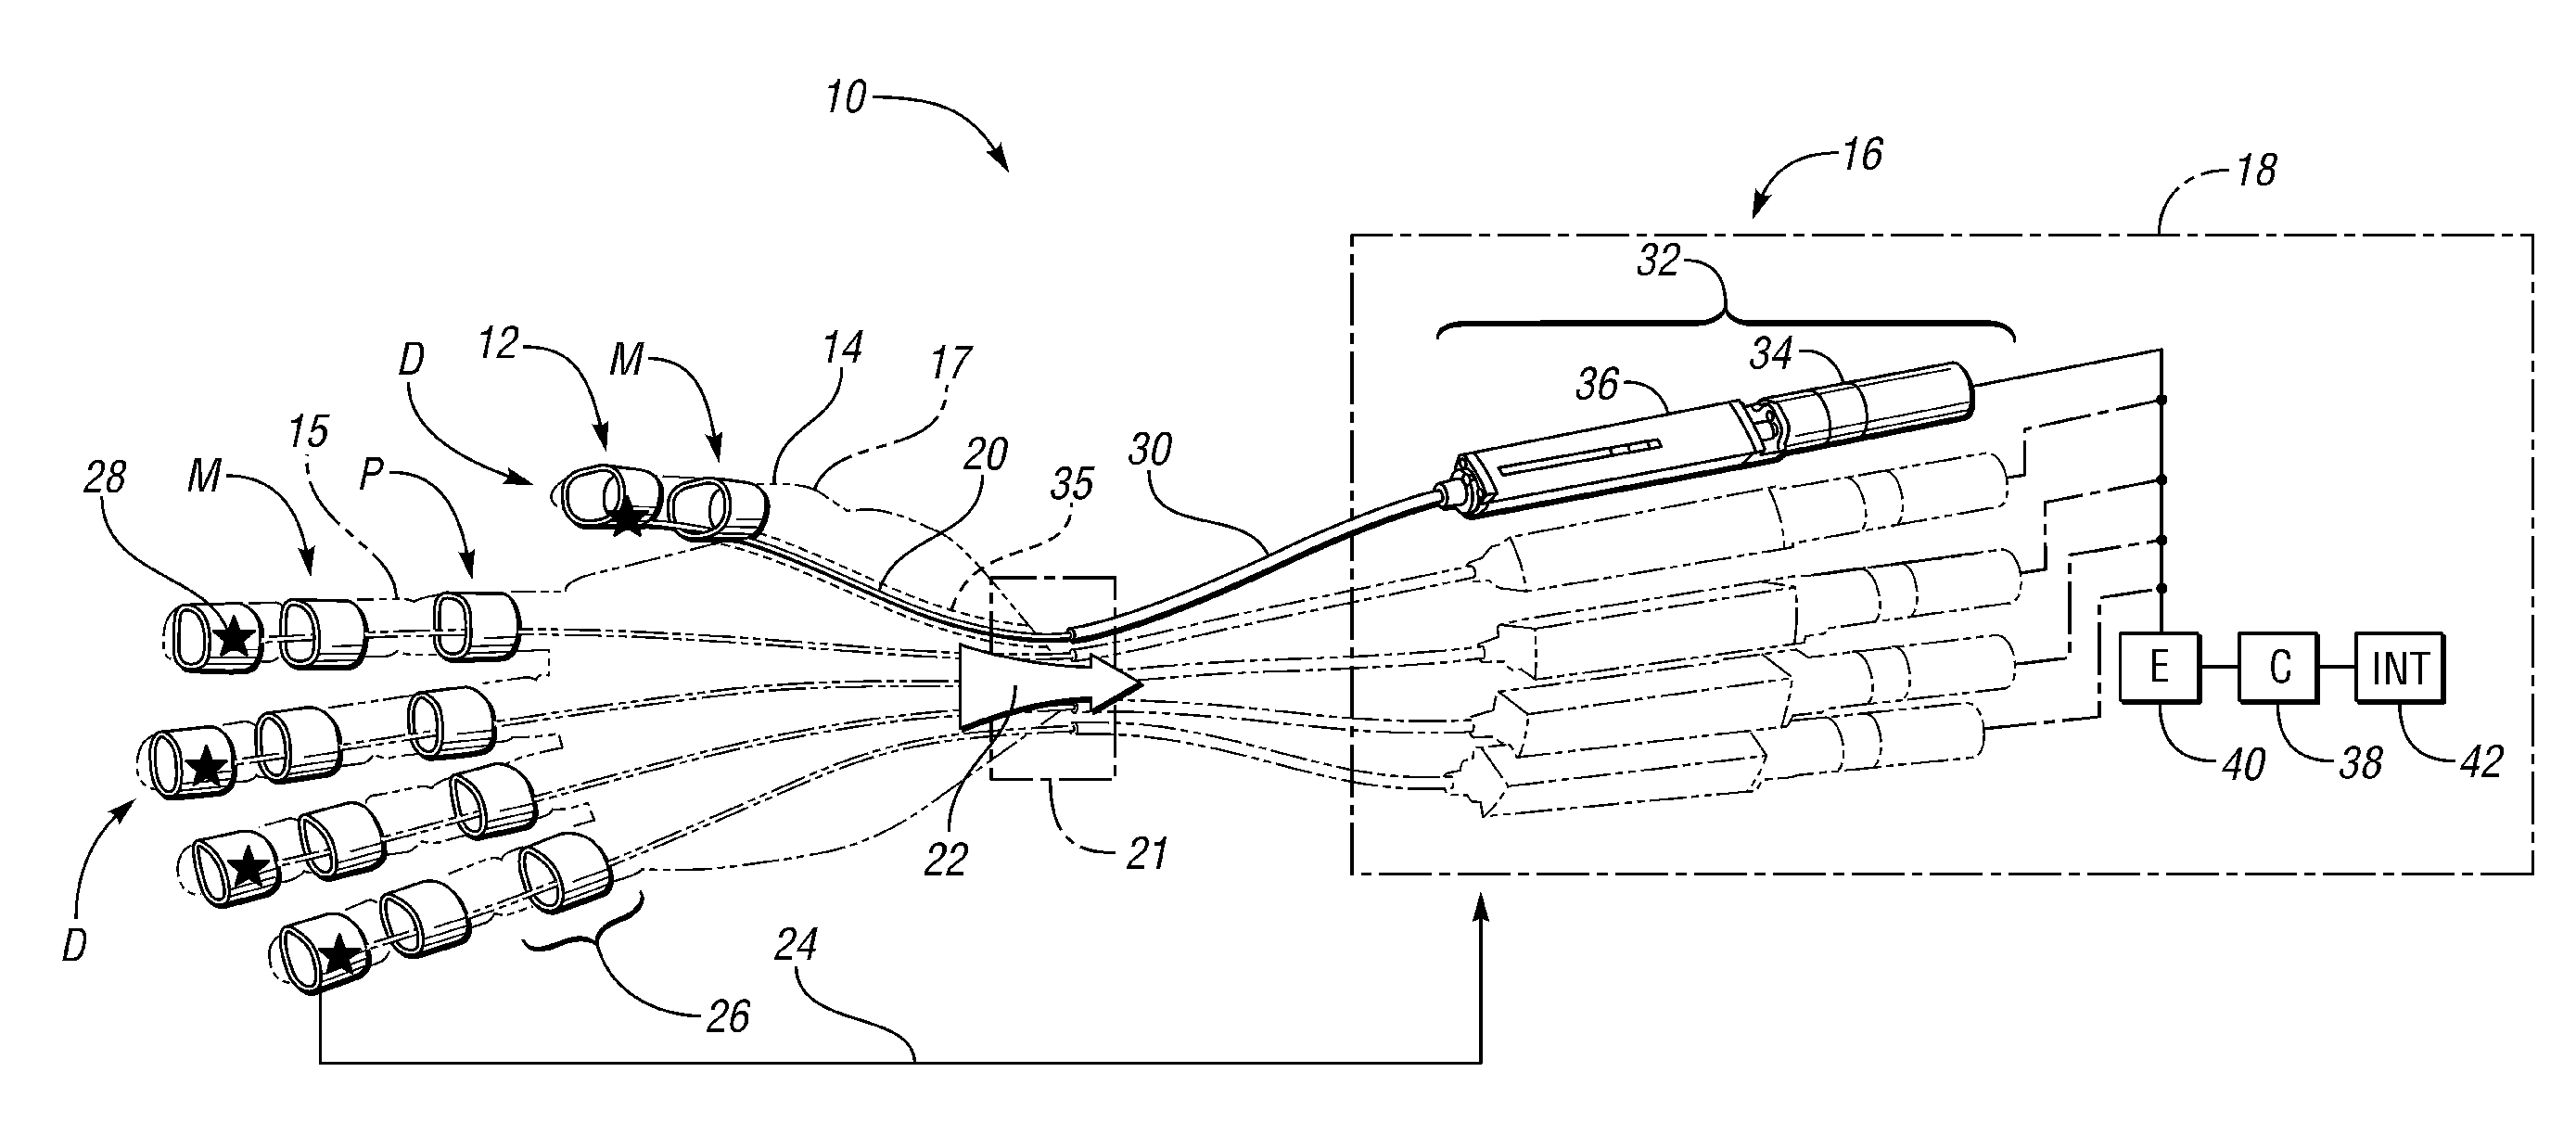 Human grasp assist device and method of use